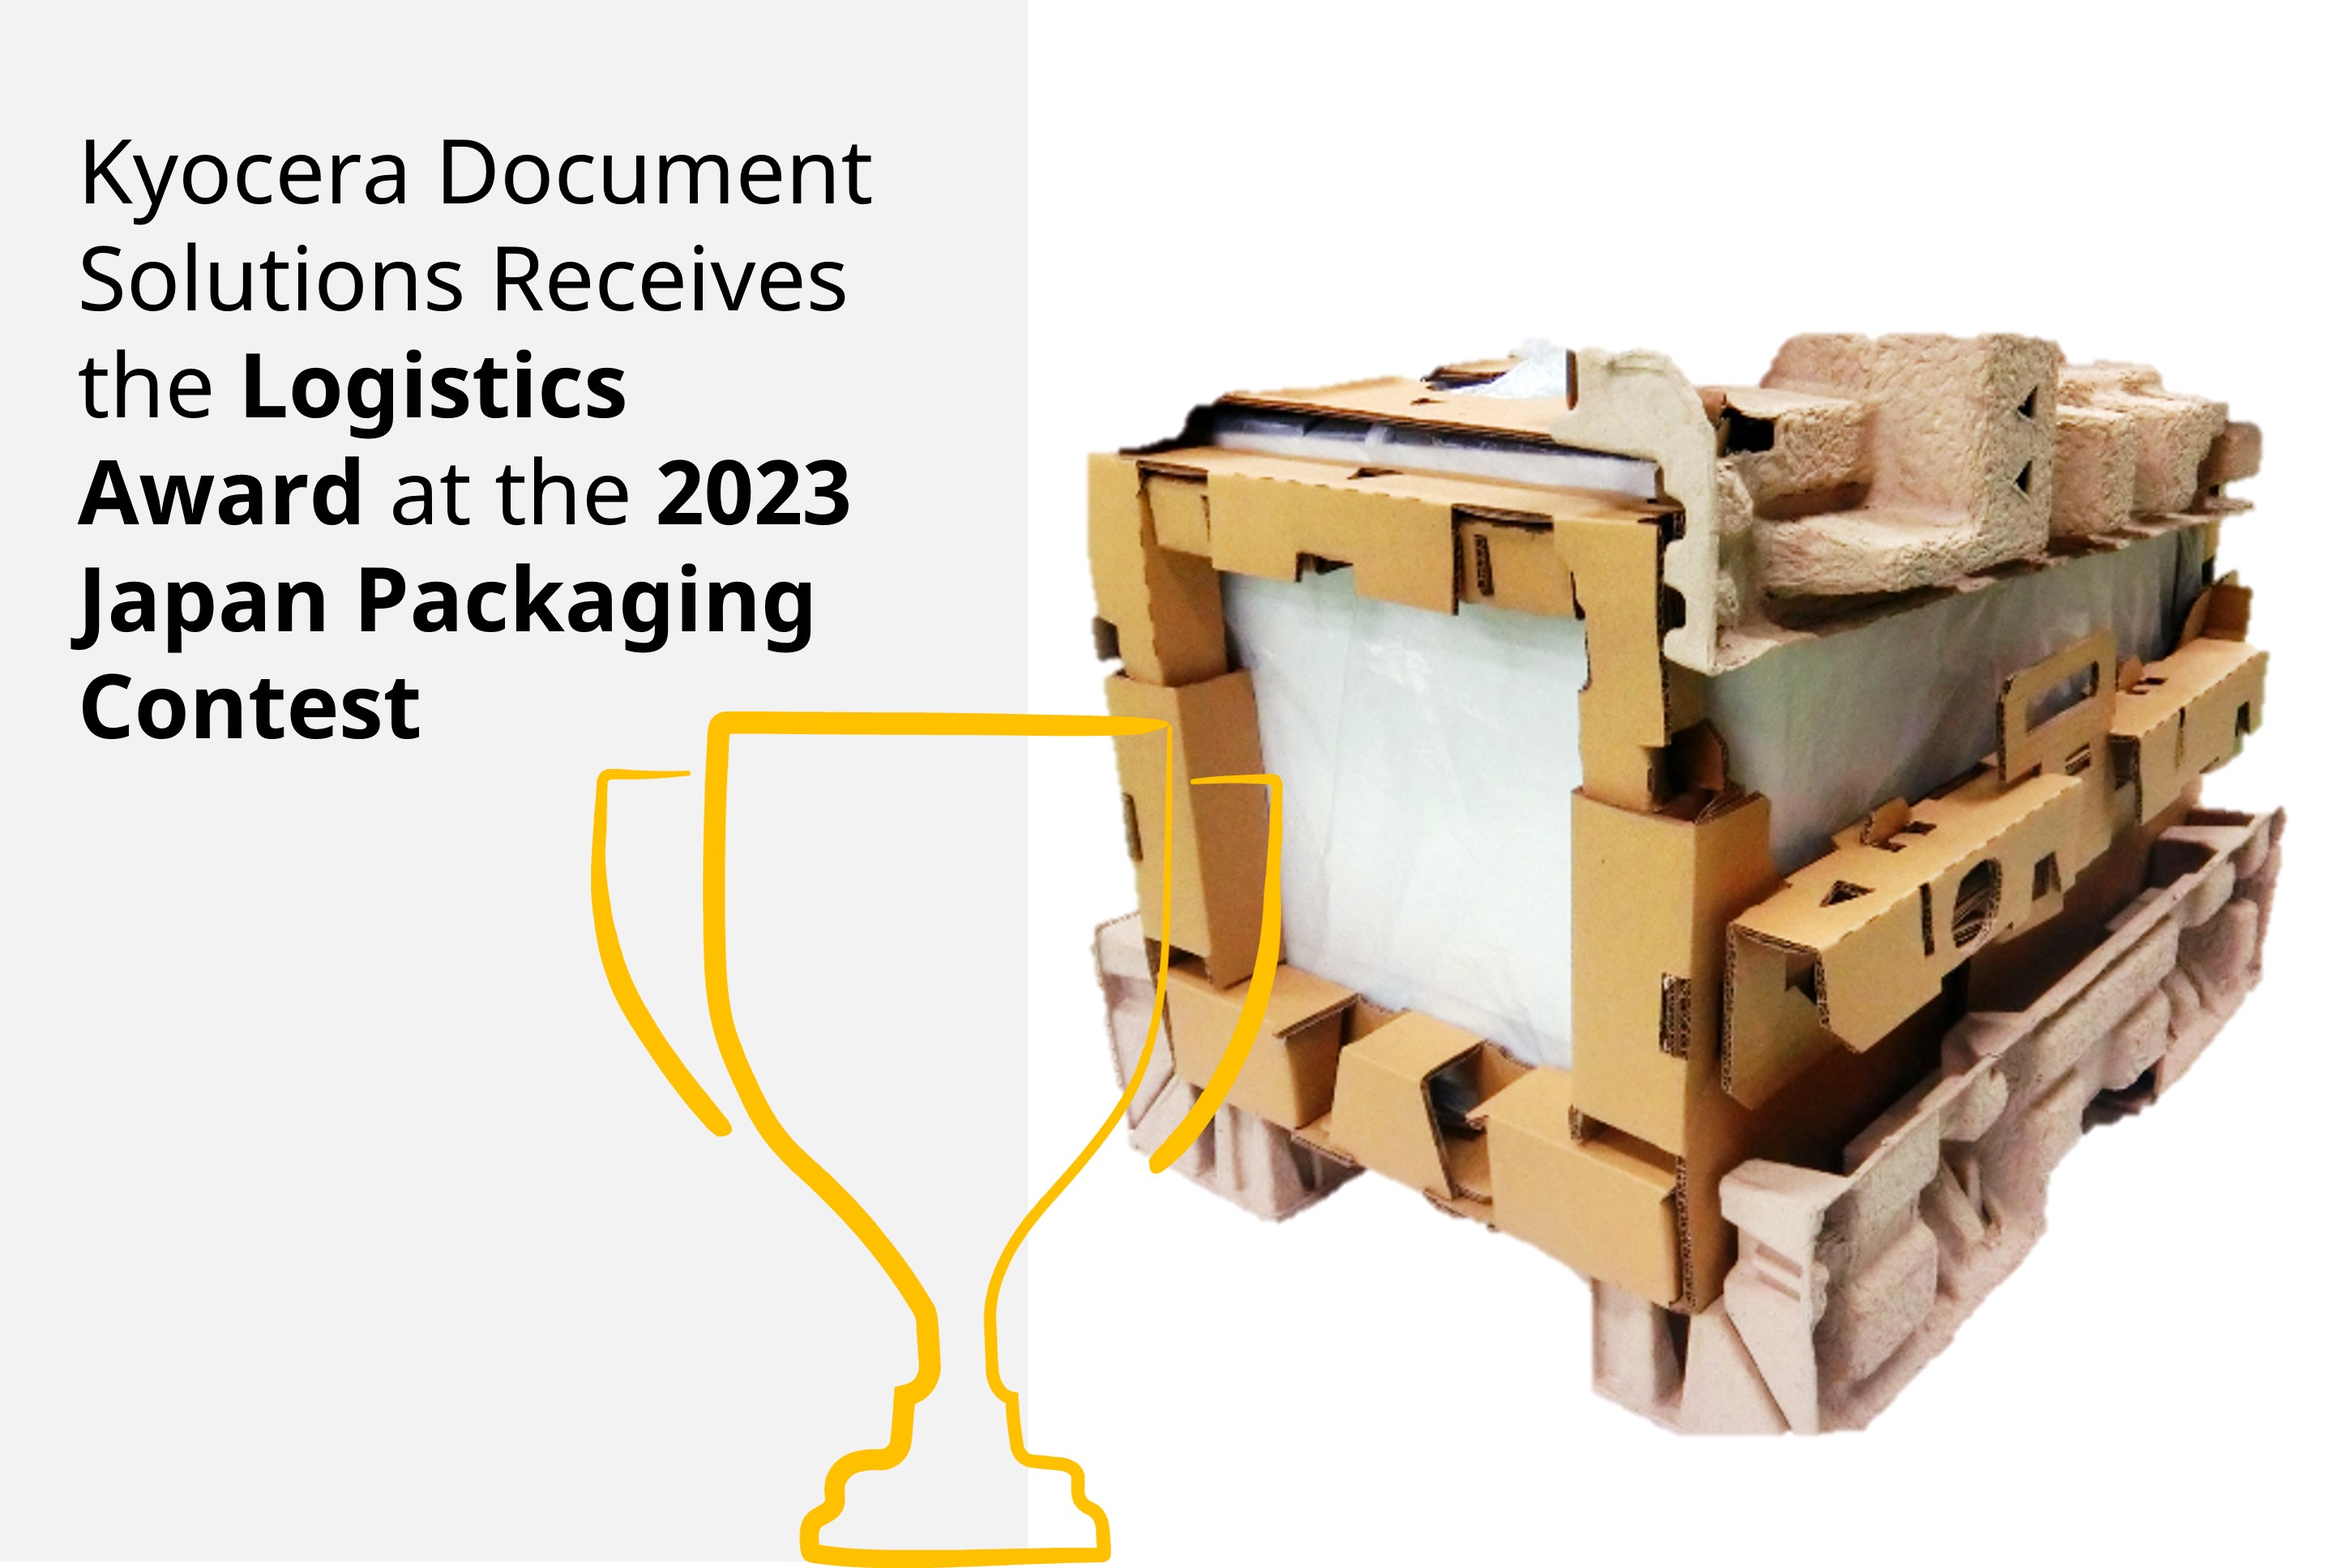 Kyocera Document Solutions Receives the Logistics Award at the 2023 Japan Packaging Contest